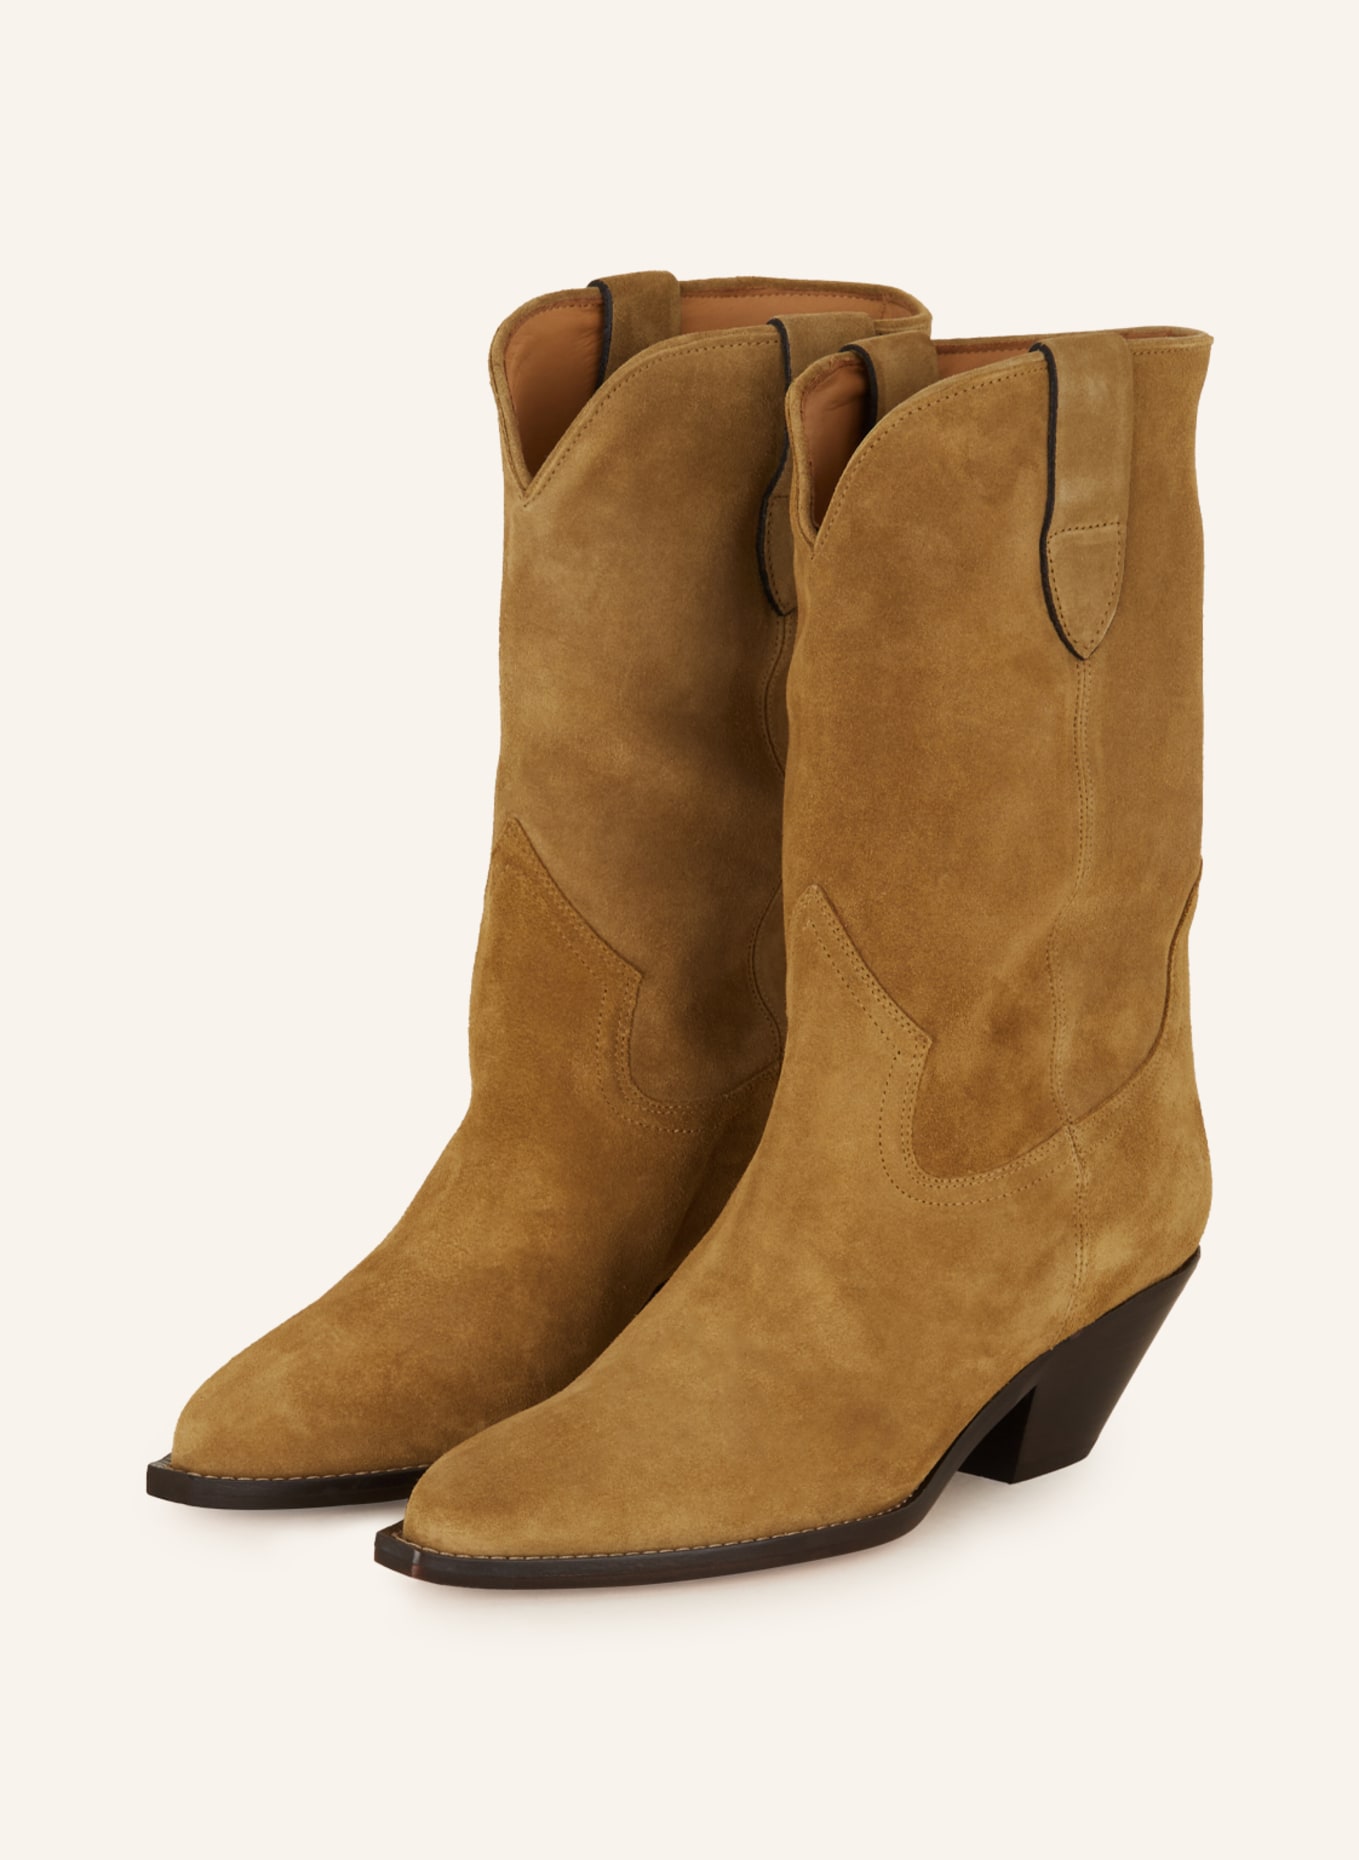 ISABEL MARANT Cowboy Boots DAHOPE, Farbe: TAUPE (Bild 1)